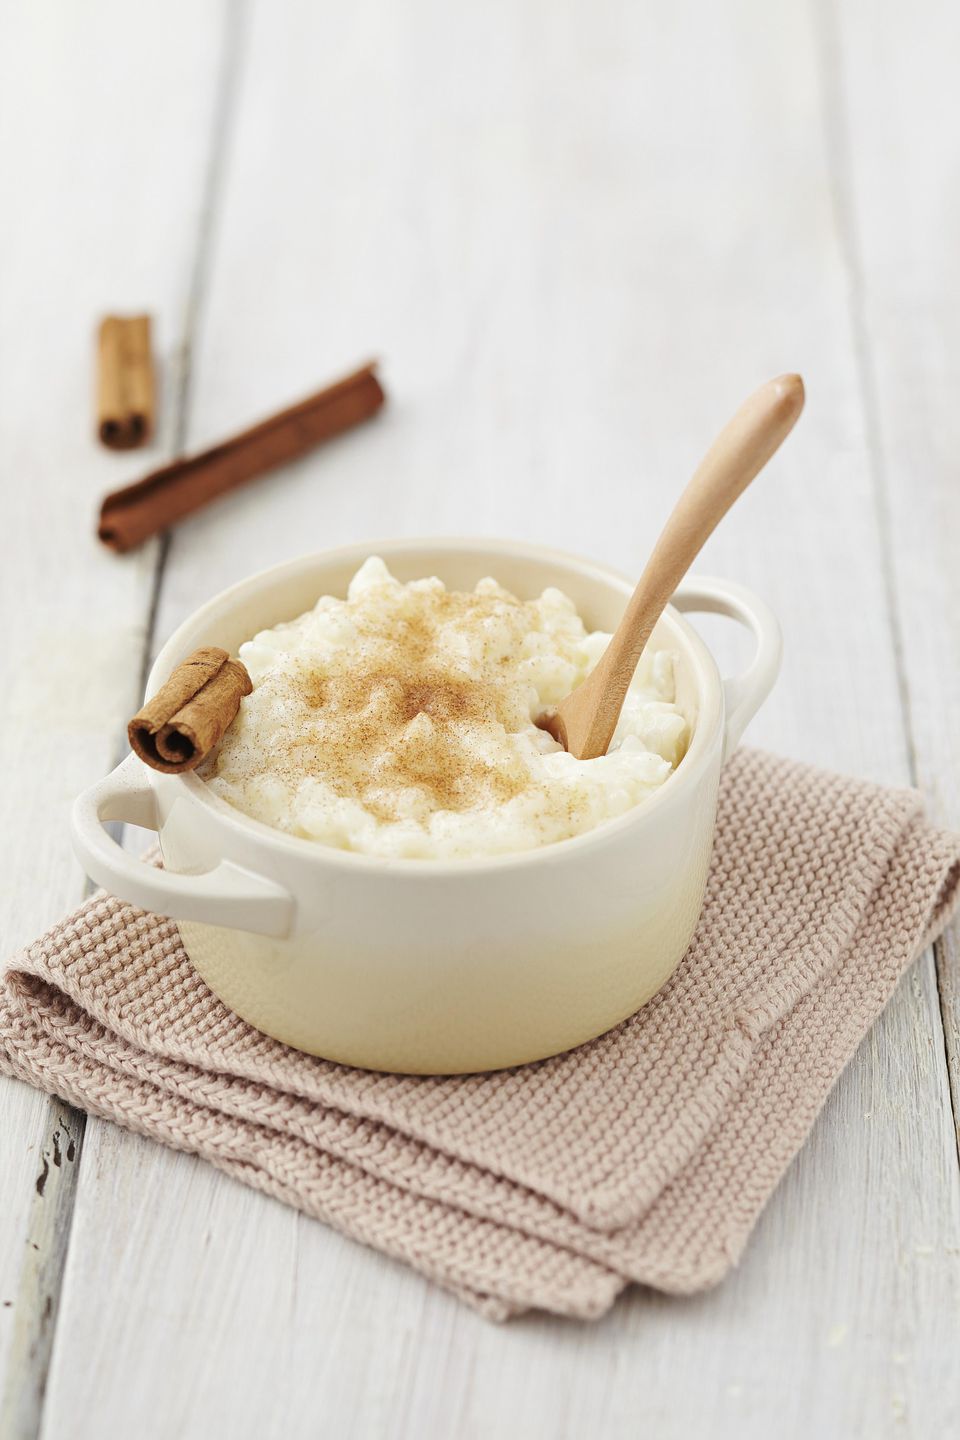 Learn How to Make a 15-Minute Vanilla Rice Pudding Recipe